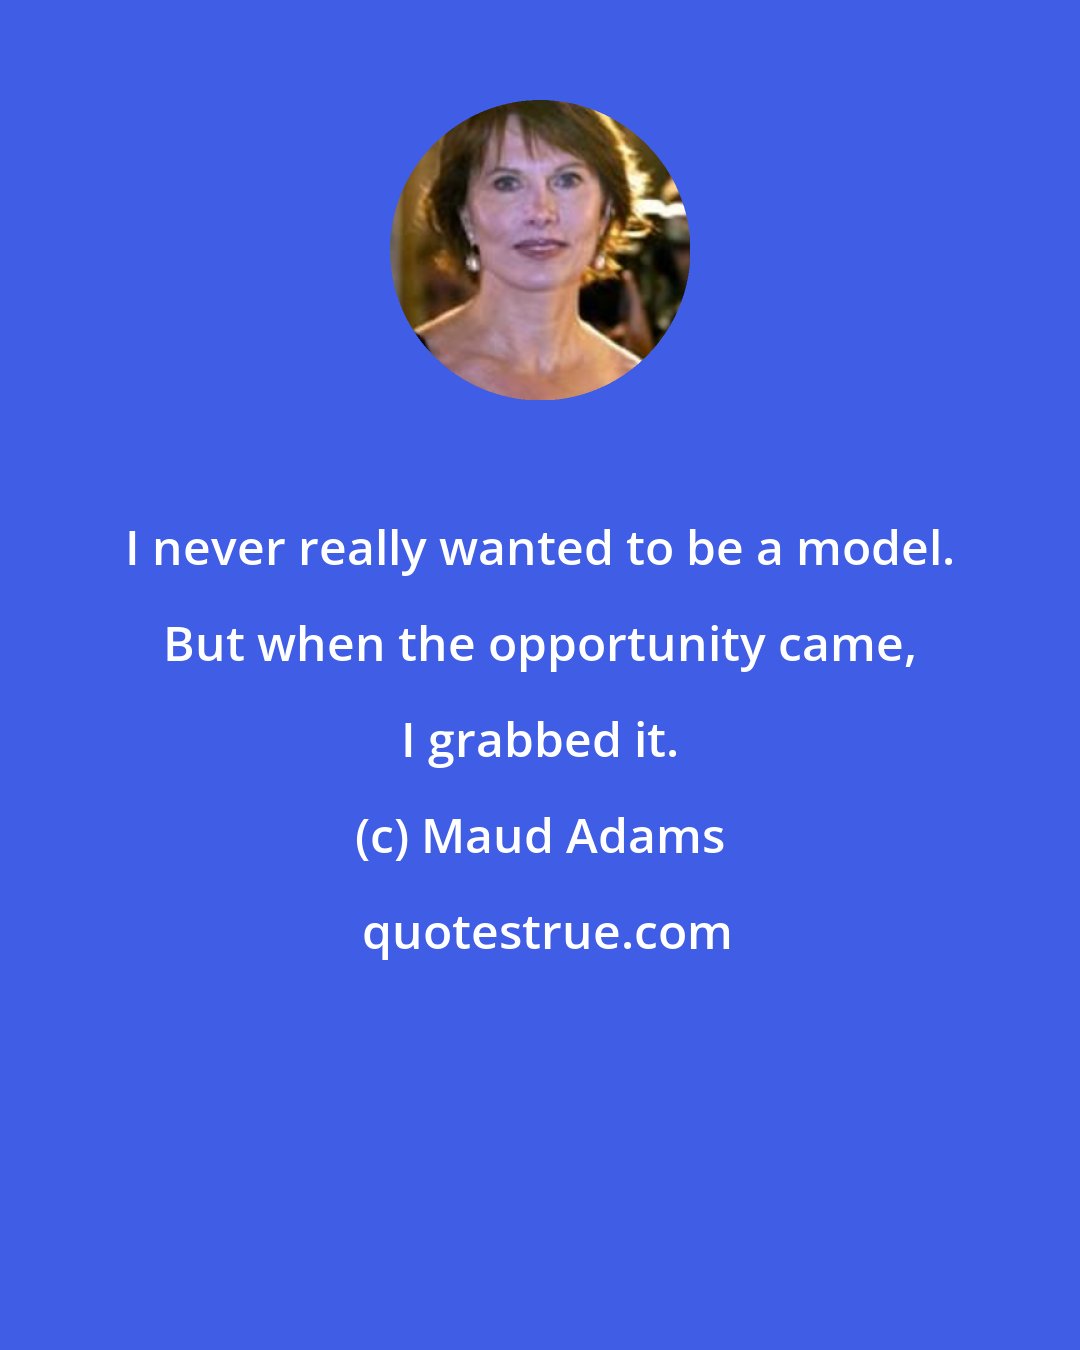 Maud Adams: I never really wanted to be a model. But when the opportunity came, I grabbed it.